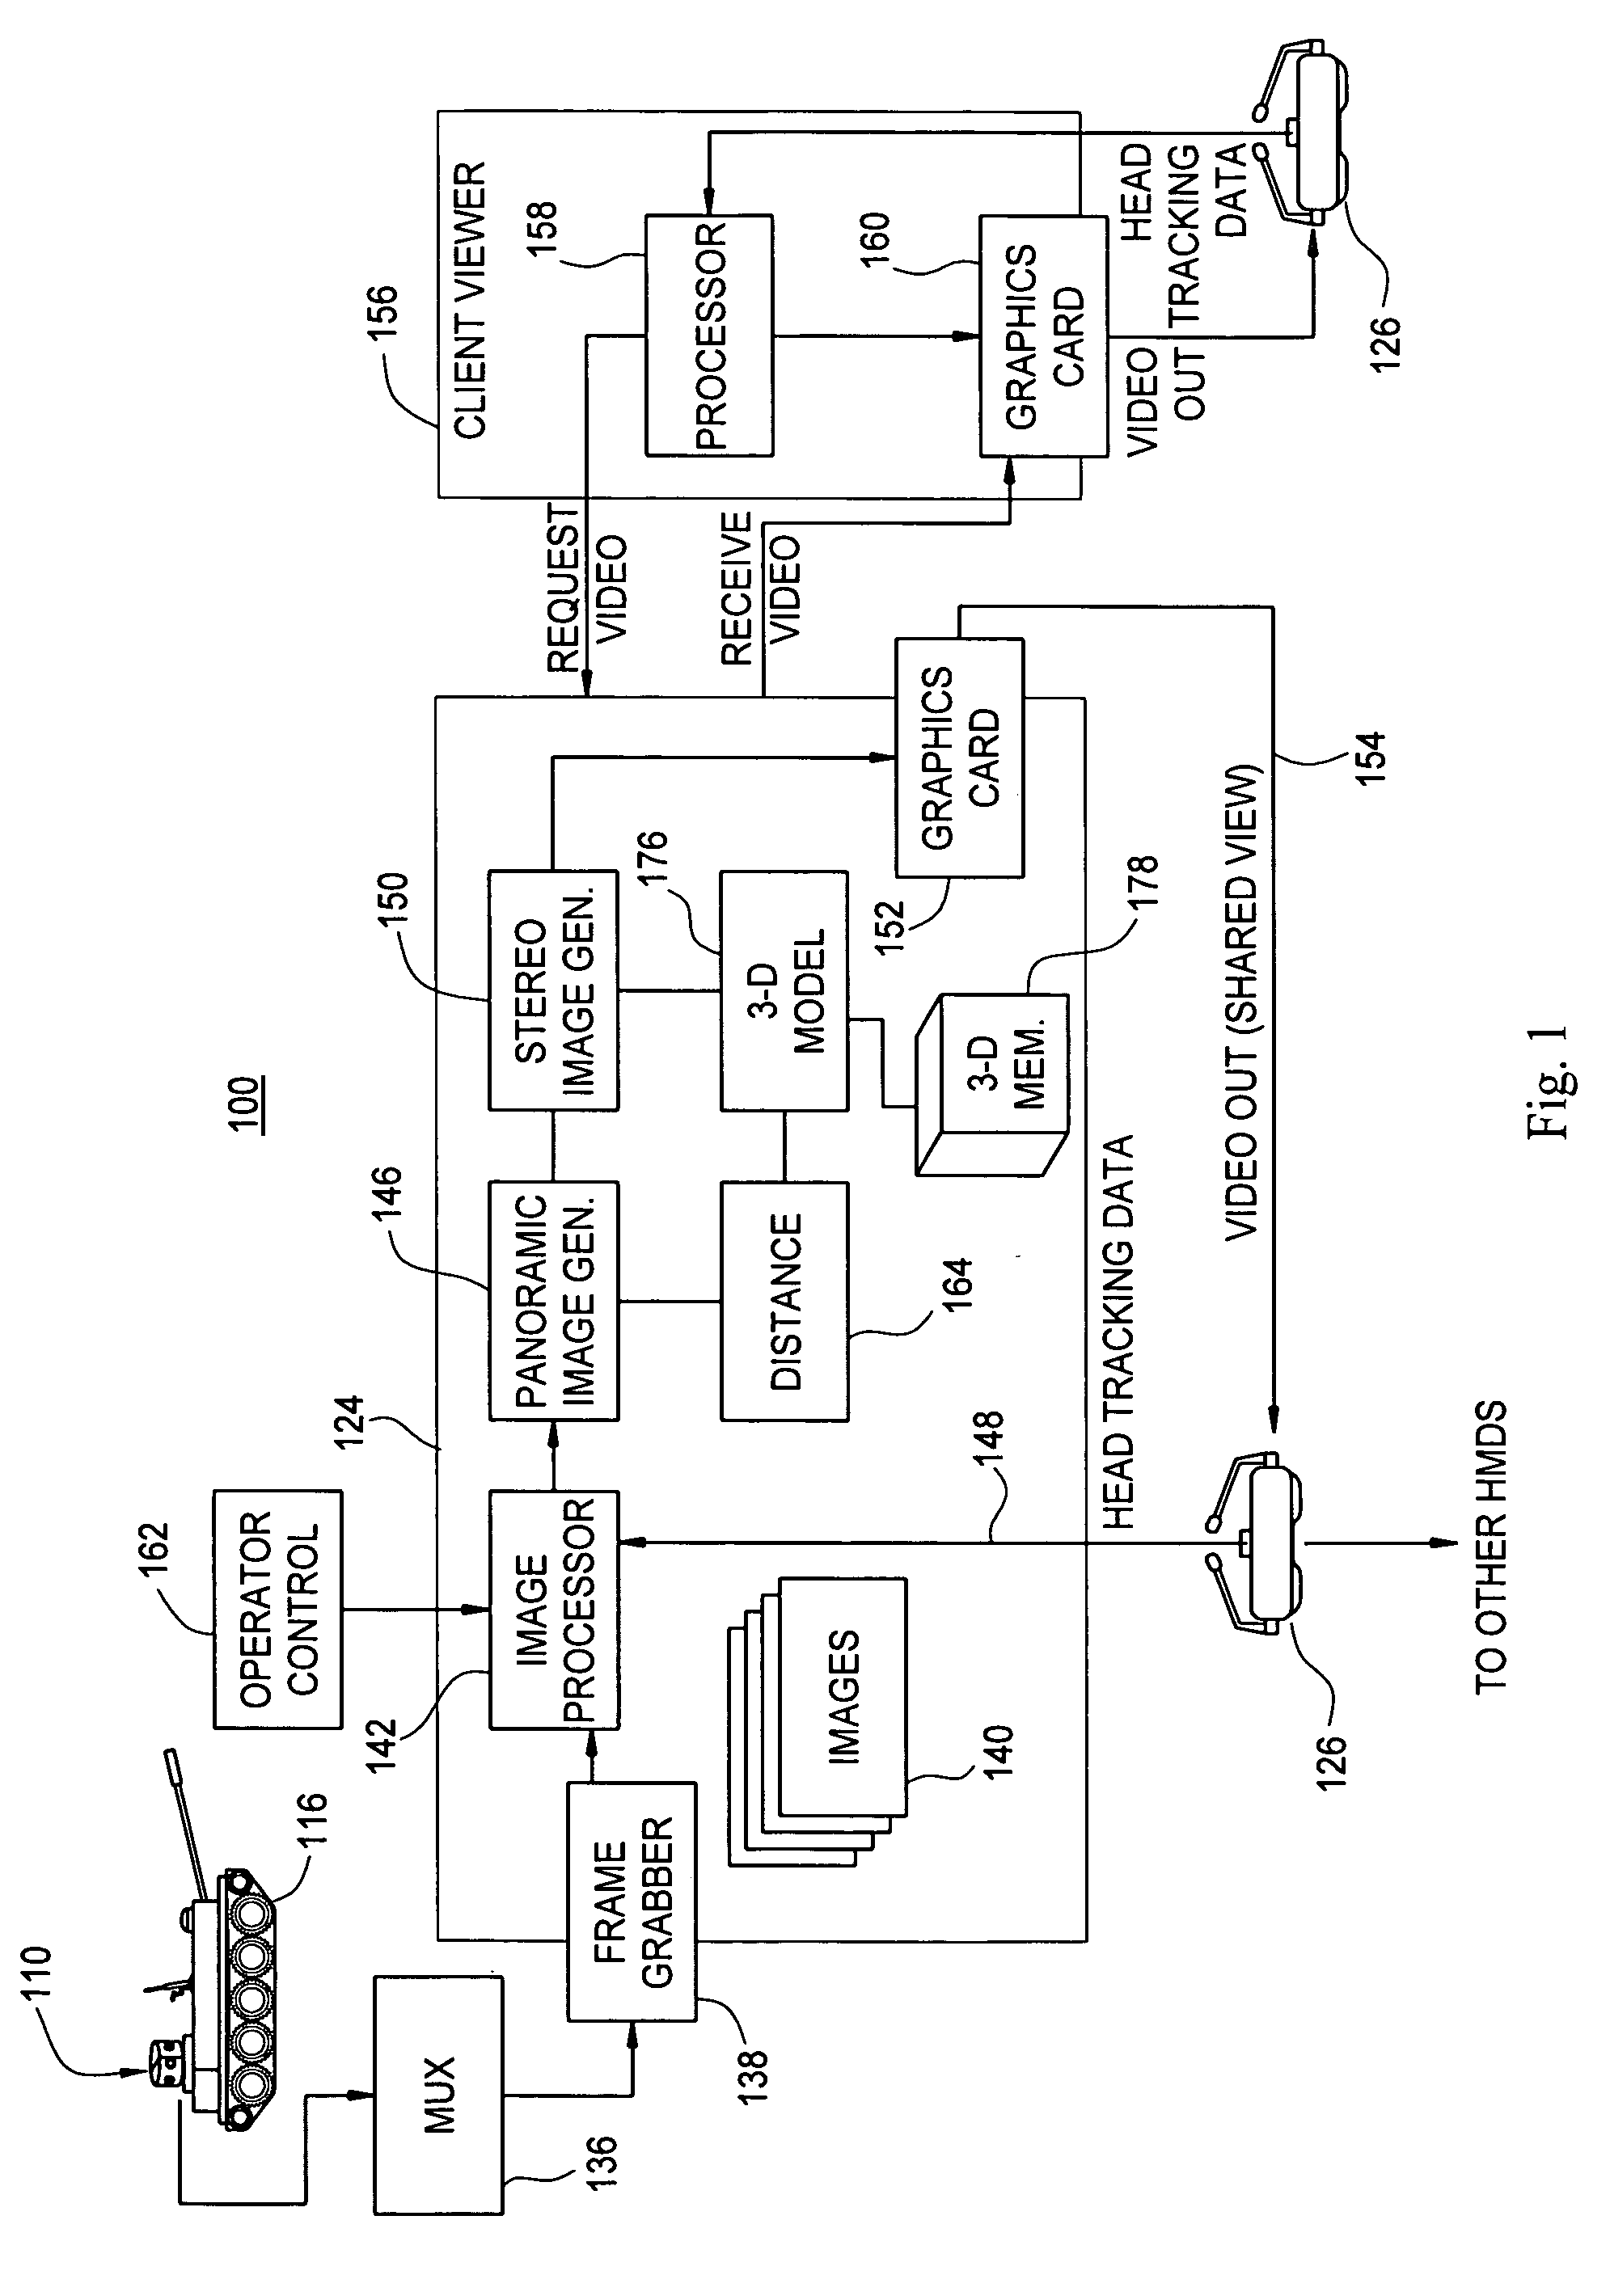 Multi-user stereoscopic 3-D panoramic vision system and method